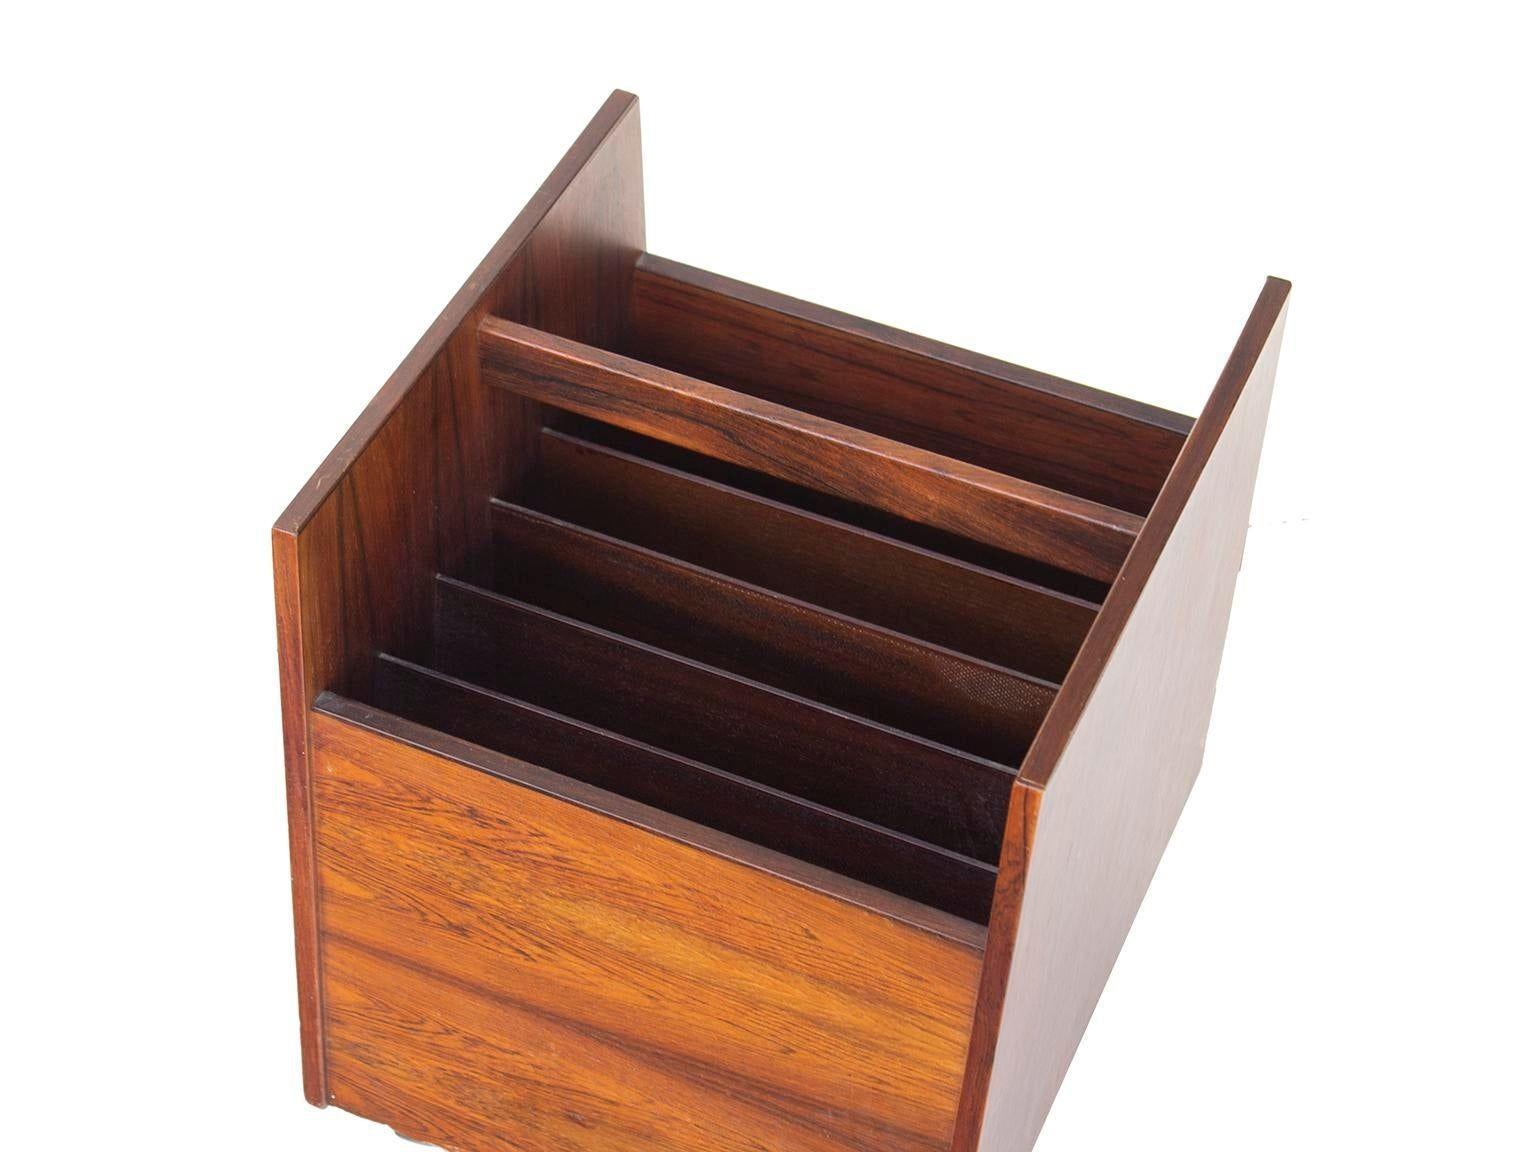 20th Century Rolling Lp Record or Magazine Caddy in Rosewood by Bruksbo For Sale